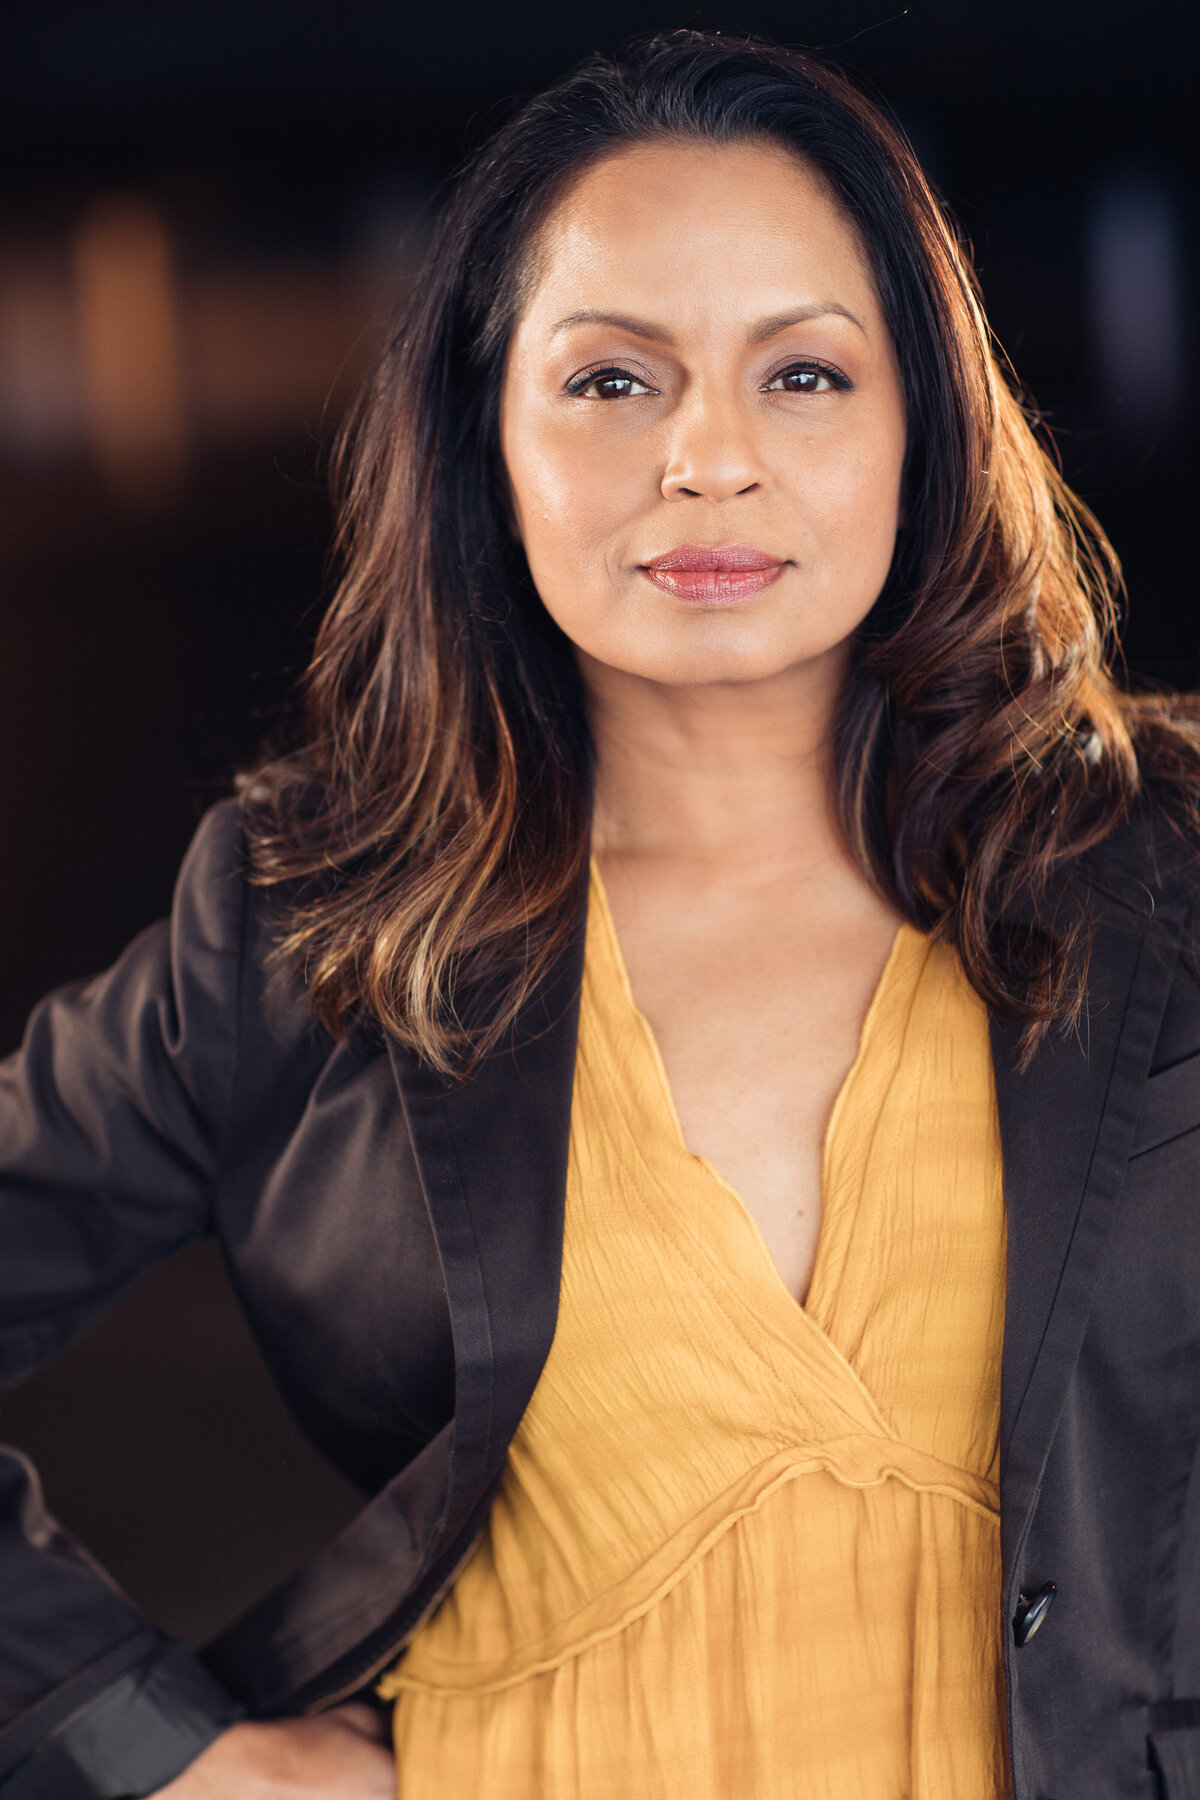 Headshot Photograph Of Woman In Outer Brown Jacket And Inner Yellow Blouse Los Angeles